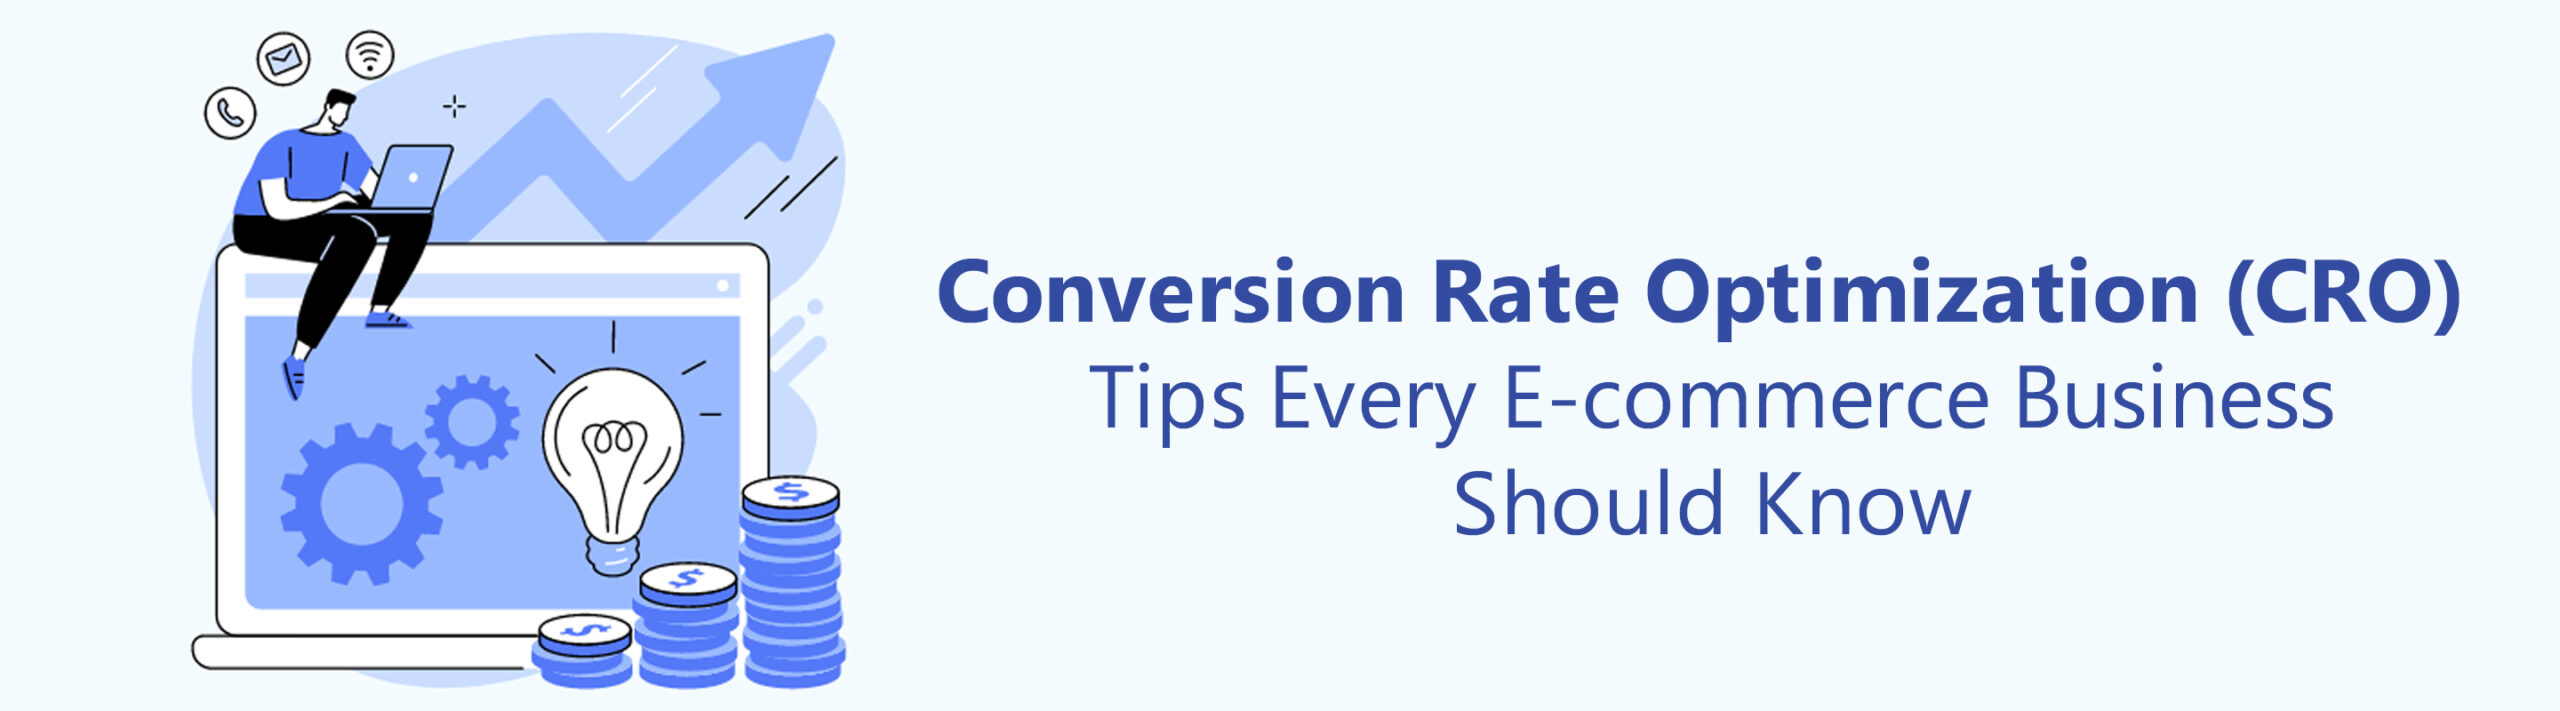 CONVERSION RATE OPTIMIZATION (CRO) TIPS EVERY ECOMMERCE BUSINESS SHOULD KNOW